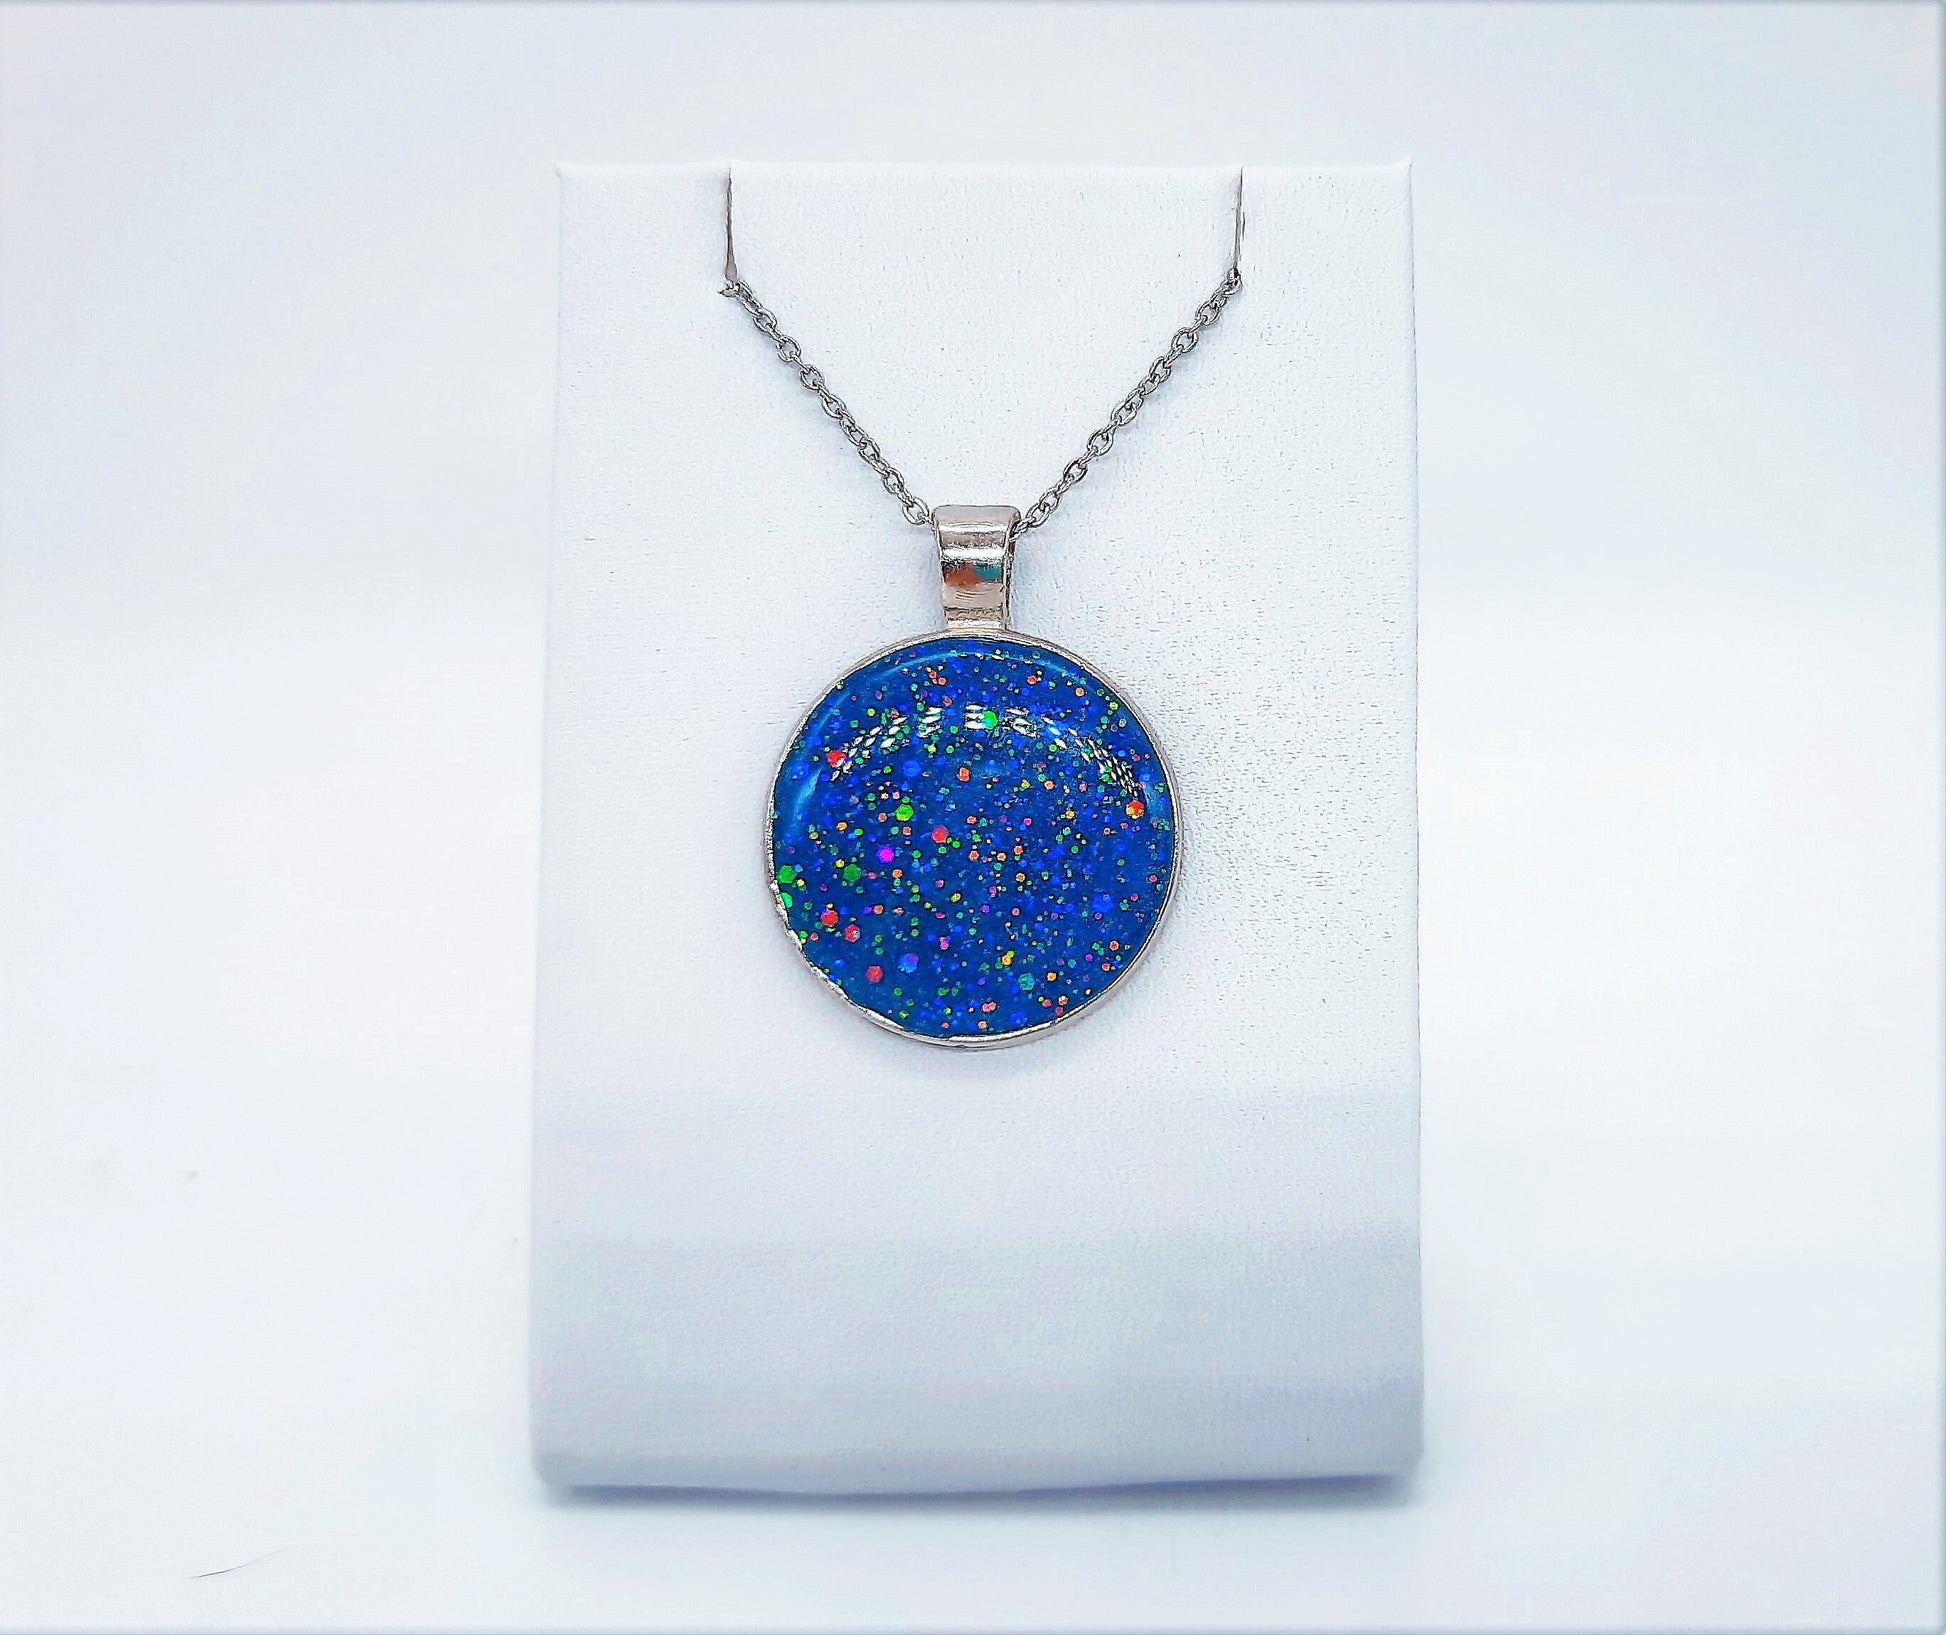 Blue Sparkle Resin Pendant Necklace/Made w/ Resin, Mica, Glitter, Glow-in-the-Dark Pigment, Hypoallergenic Stainless Steel